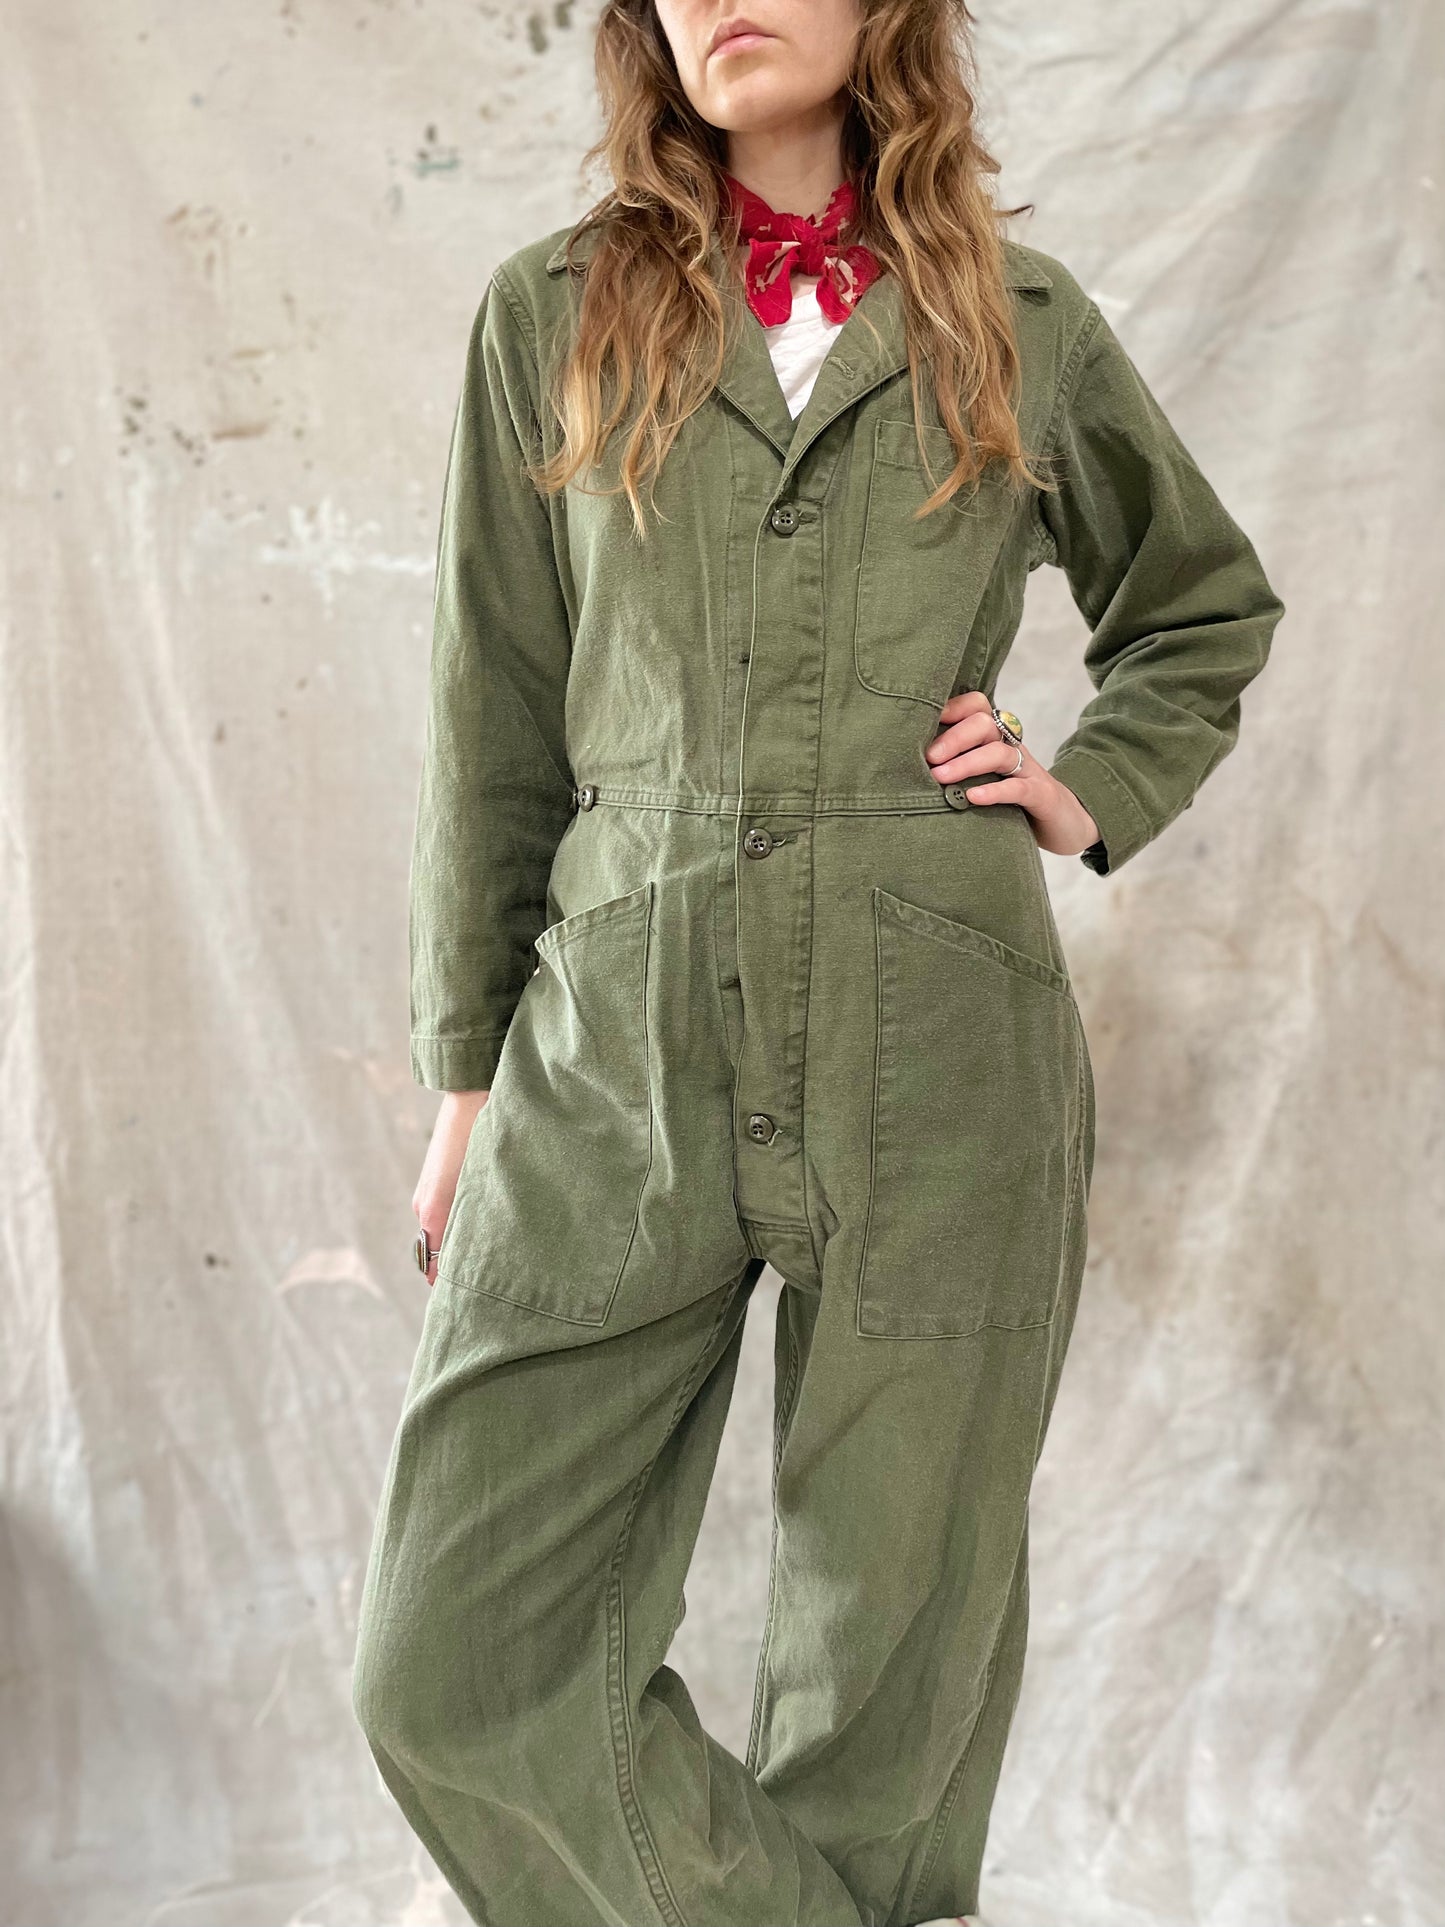 OG-107 Army Coveralls